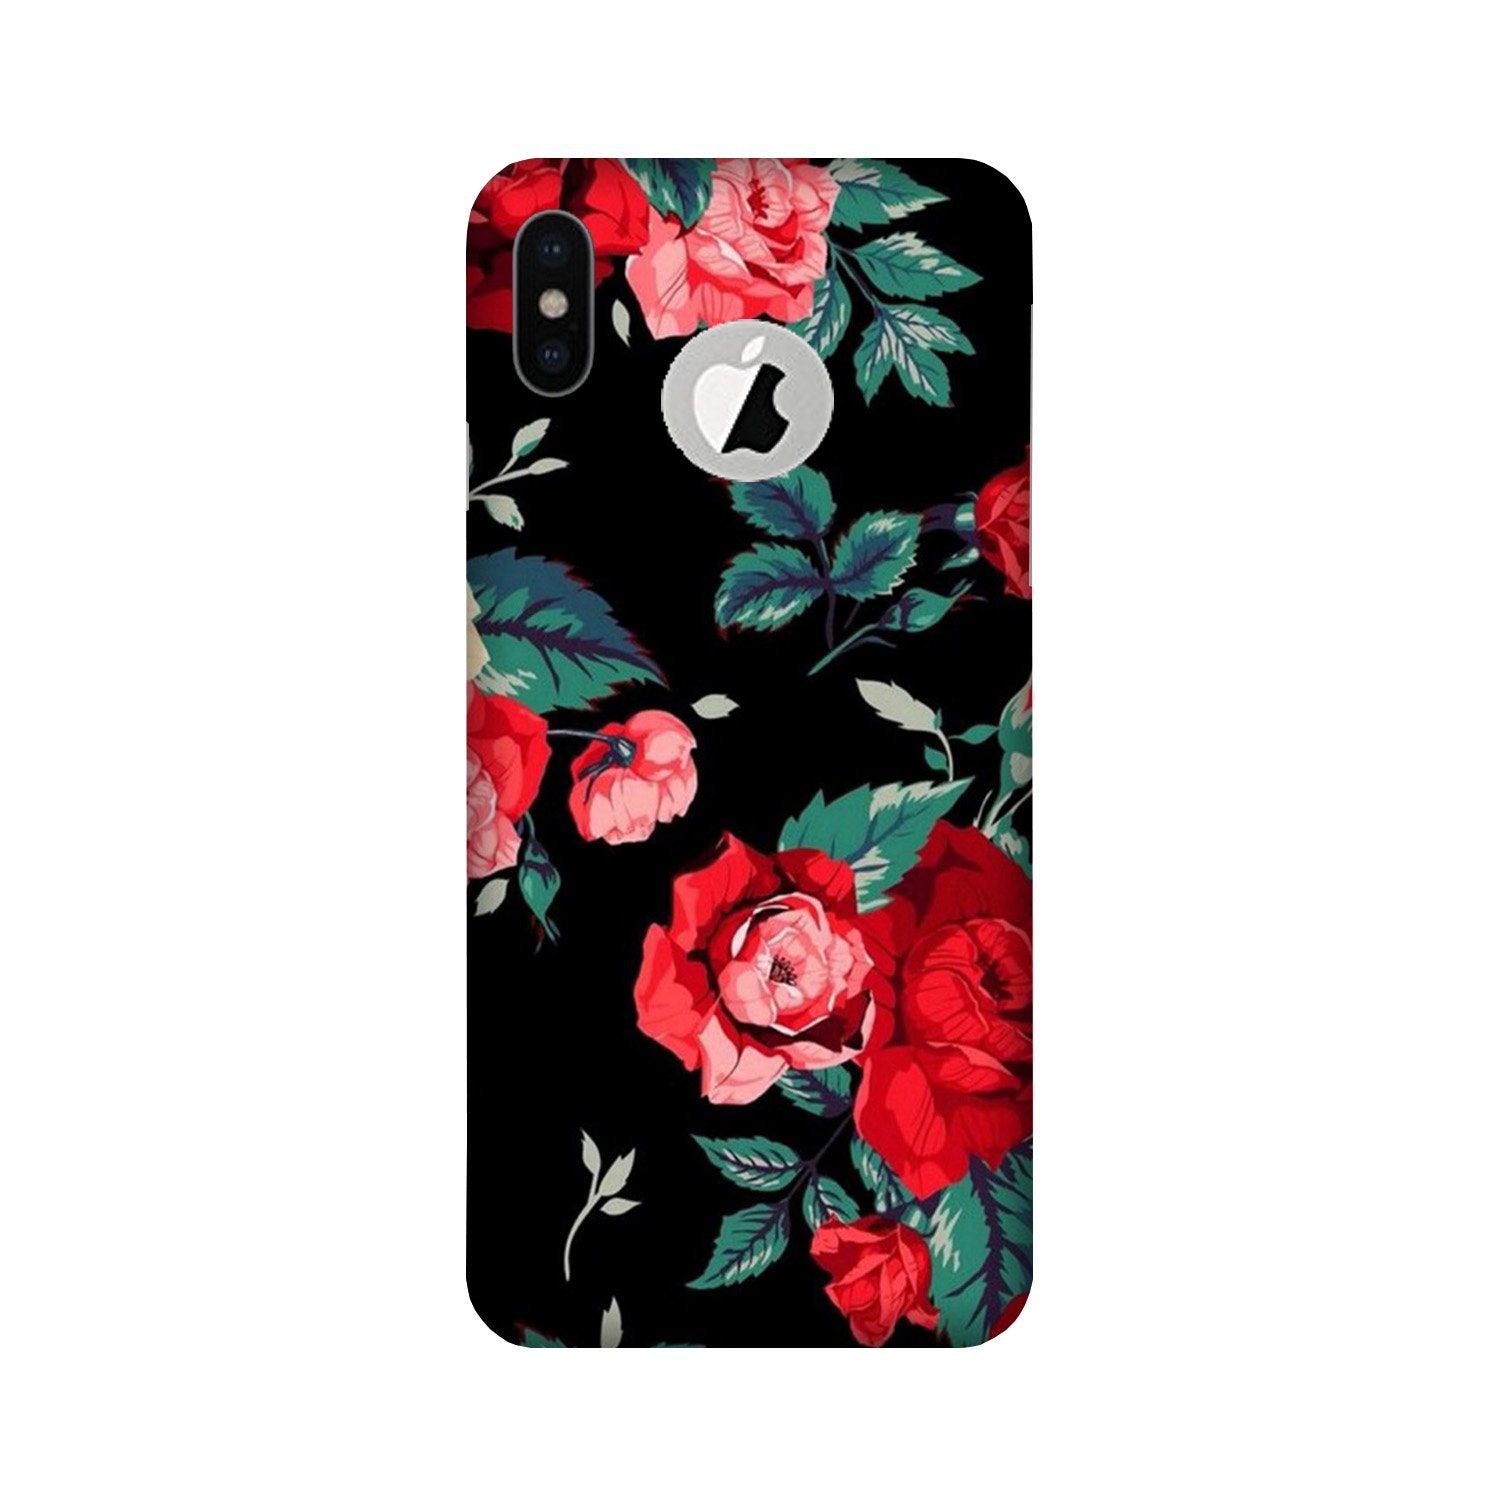 Red Rose2 Case for iPhone Xs logo cut 